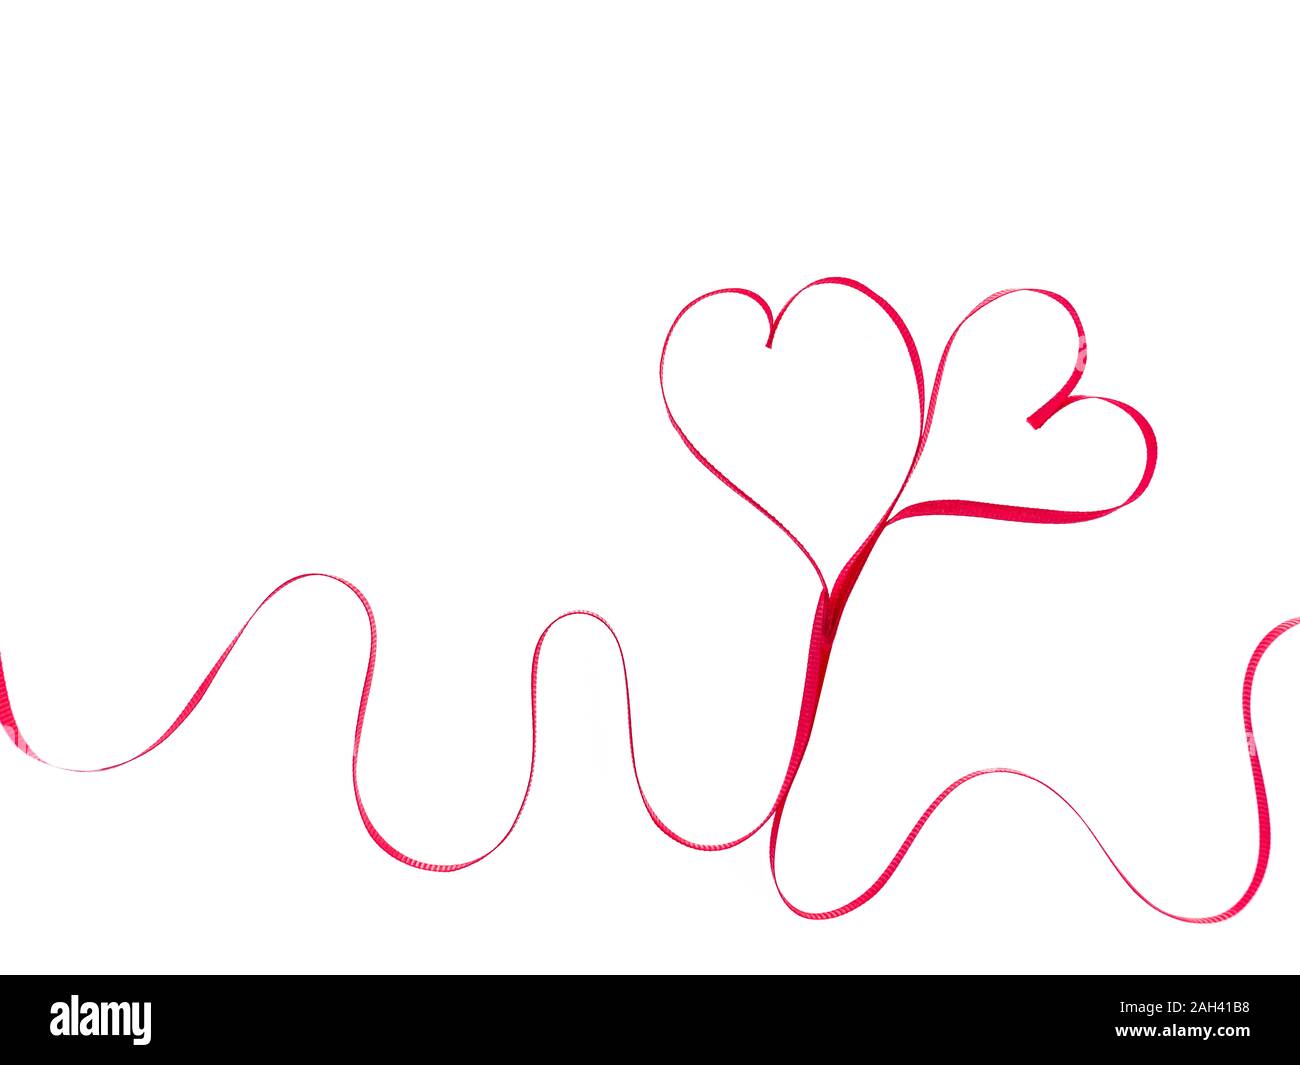 Red heart ribbons on the white background Stock Photo